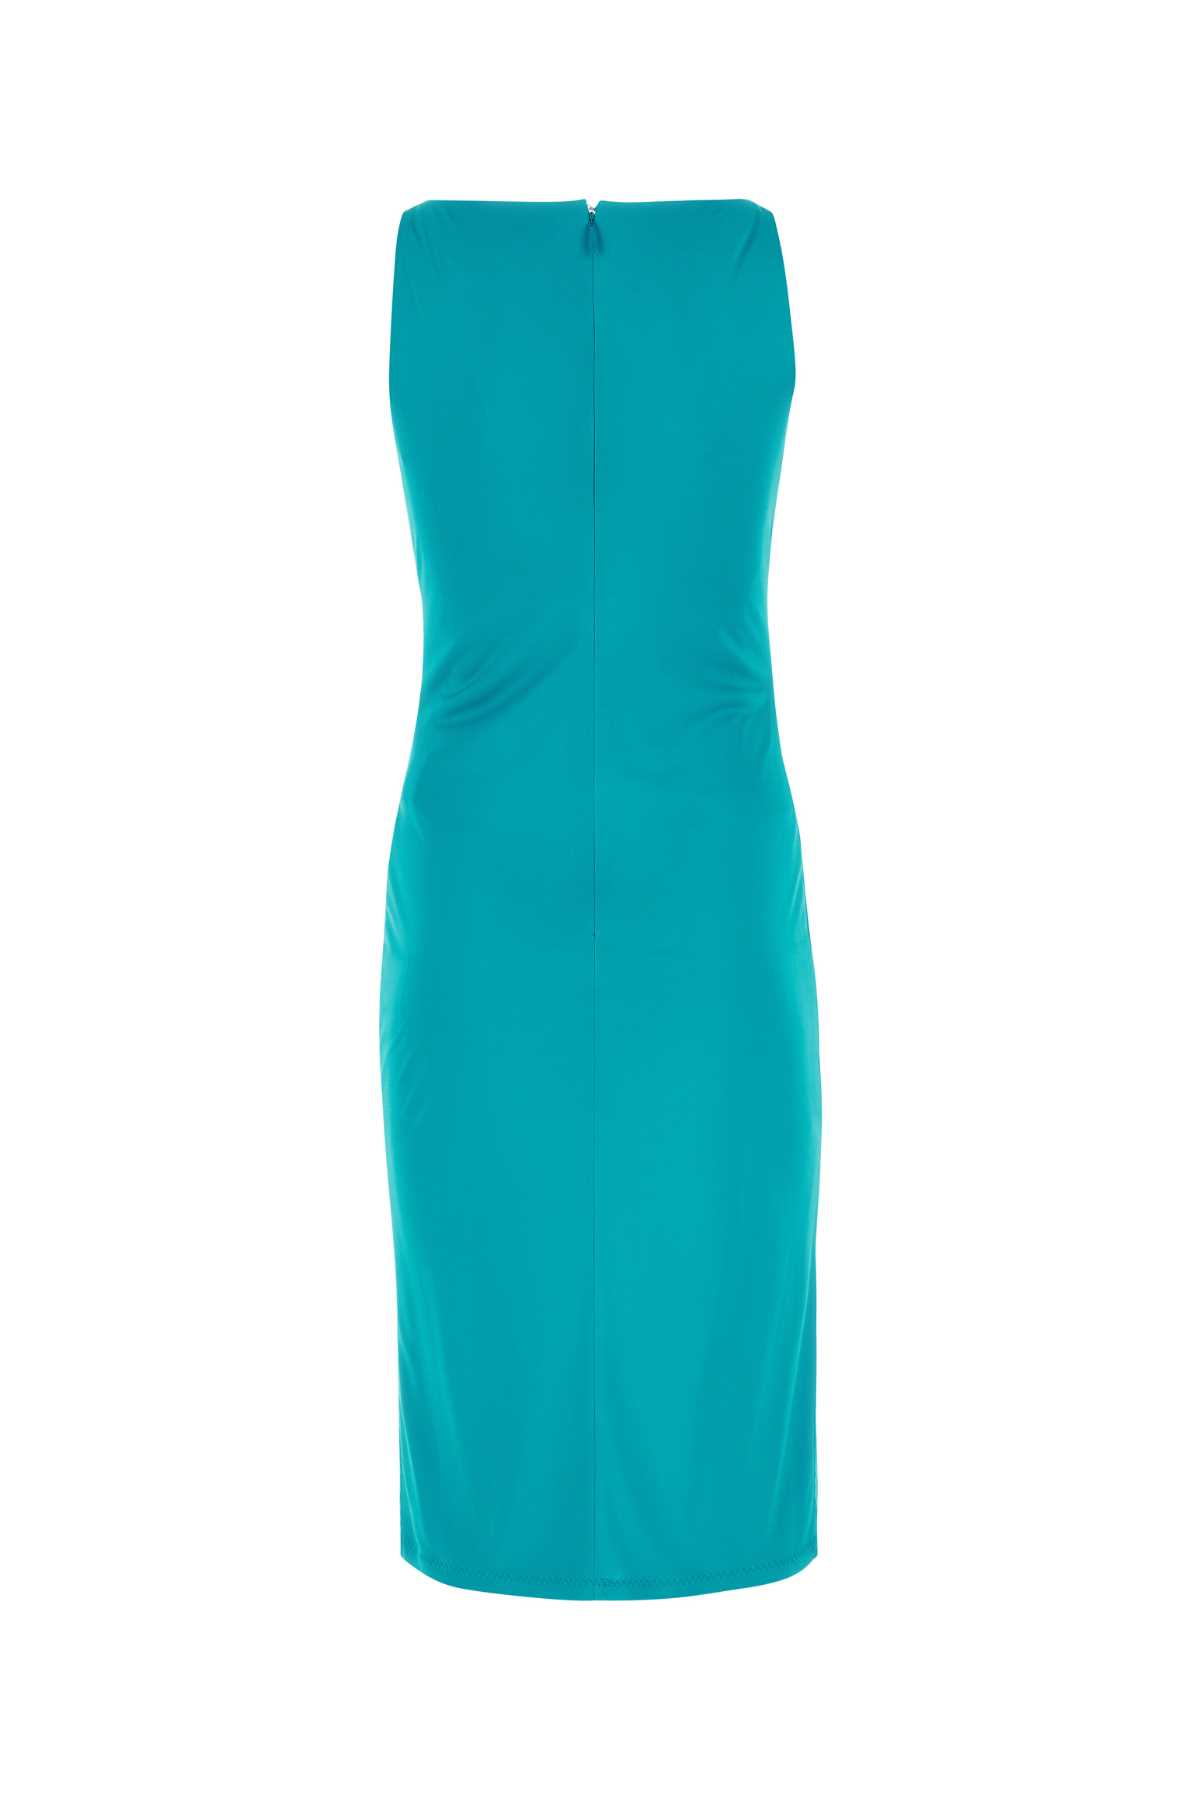 Shop Versace Teal Green Crepe Dress In Turchese